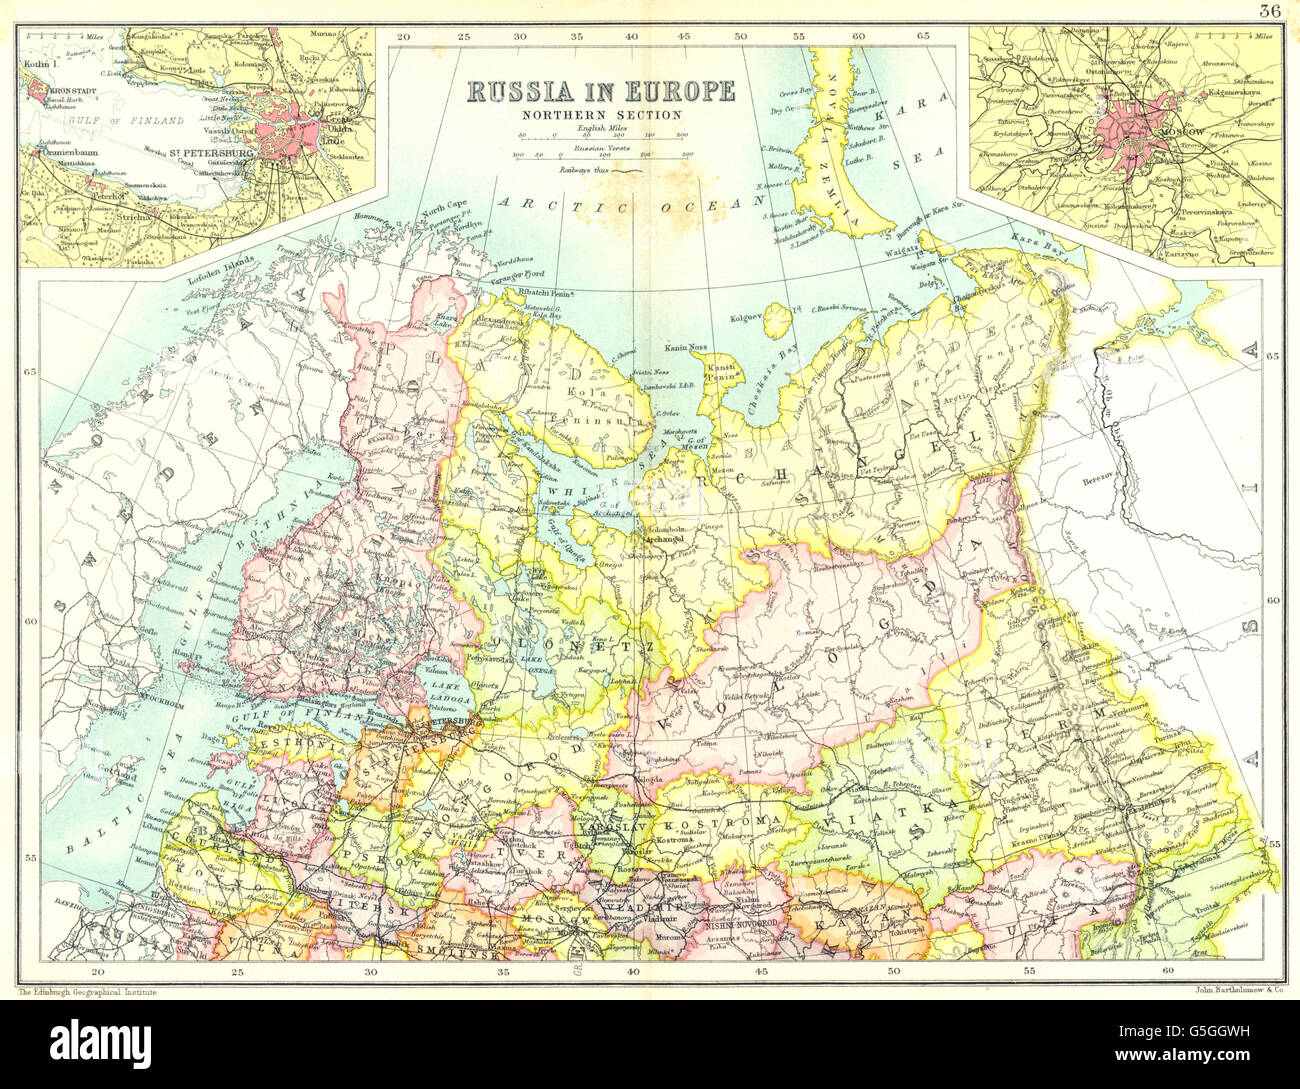 EUROPEAN RUSSIA N:St Petersburg Moscow Finland Livonia Courland Kovno, 1909 map Stock Photo